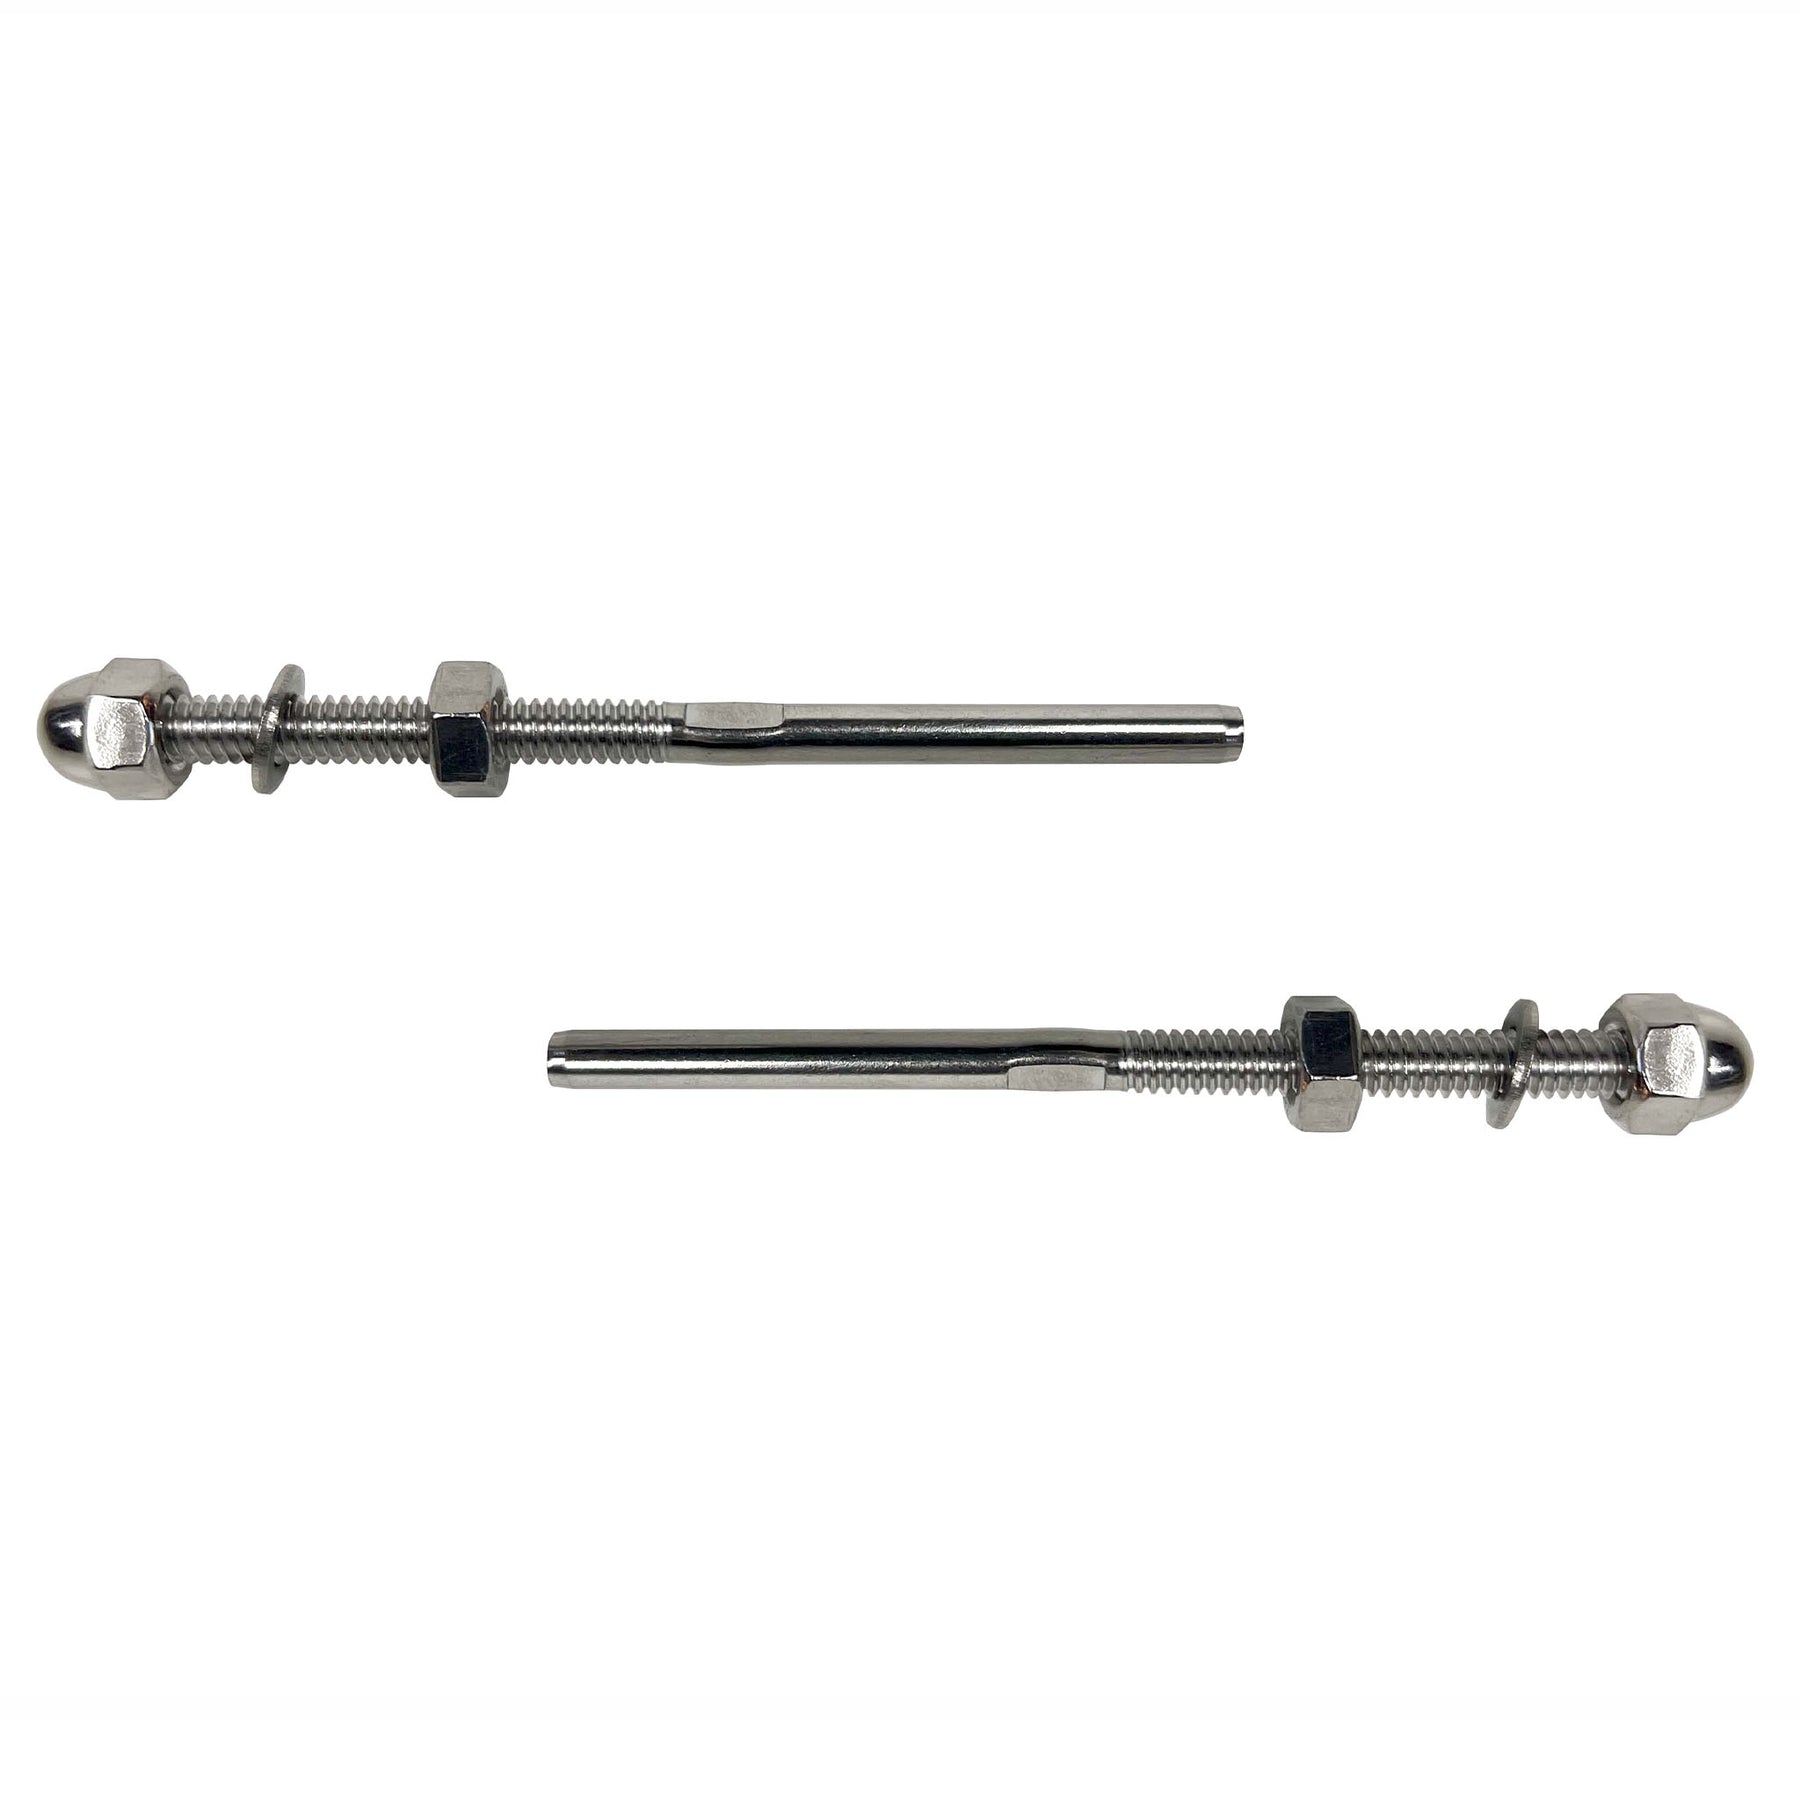 STLX-CC007 1/8" Cable Hardware Kit - Hand Swage Threaded Stud Tensioner